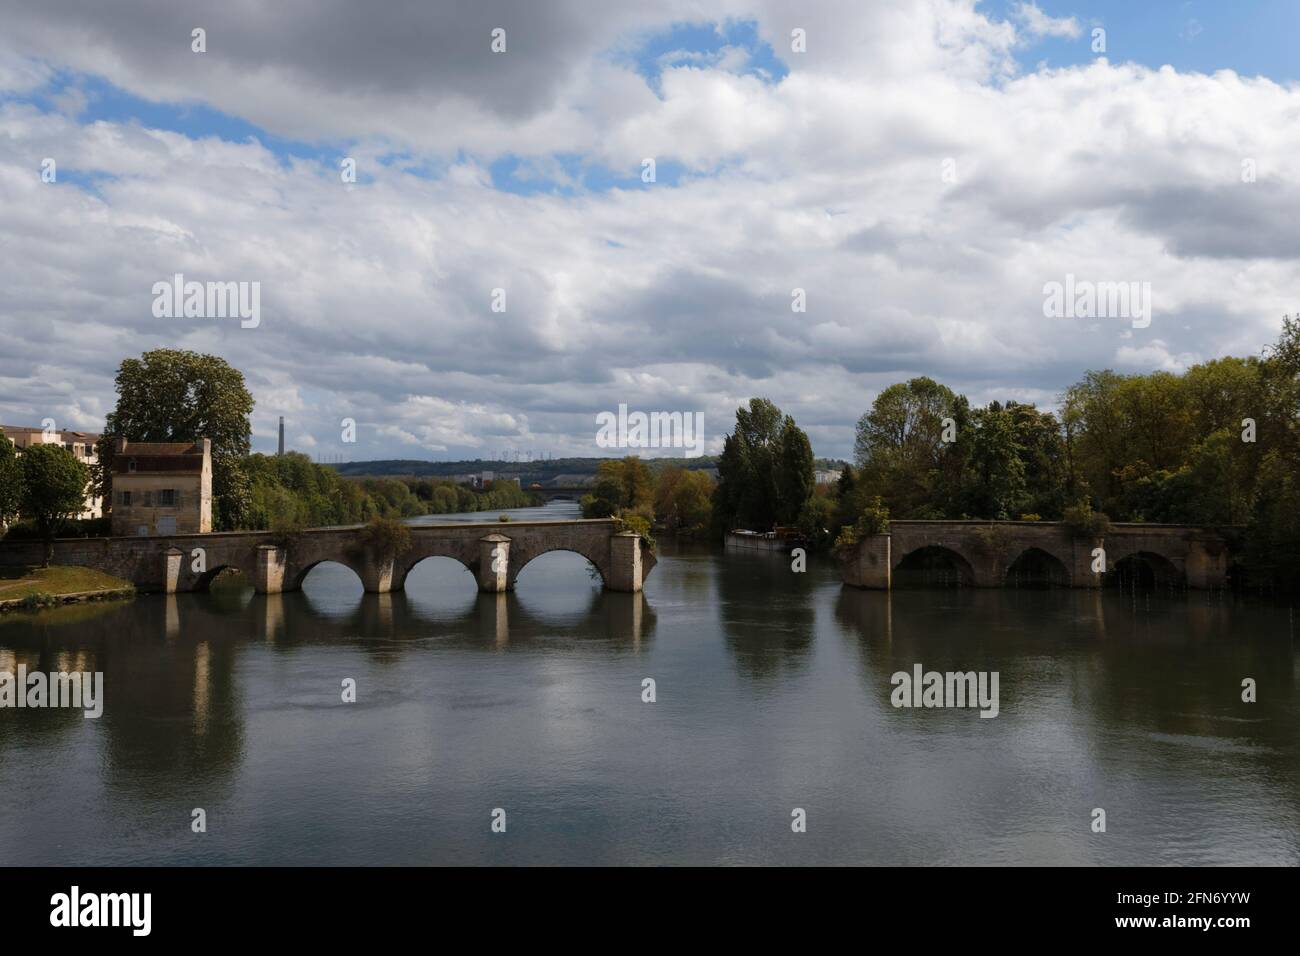 The Old Bridge at Limay, Yvelines, France Stock Photo